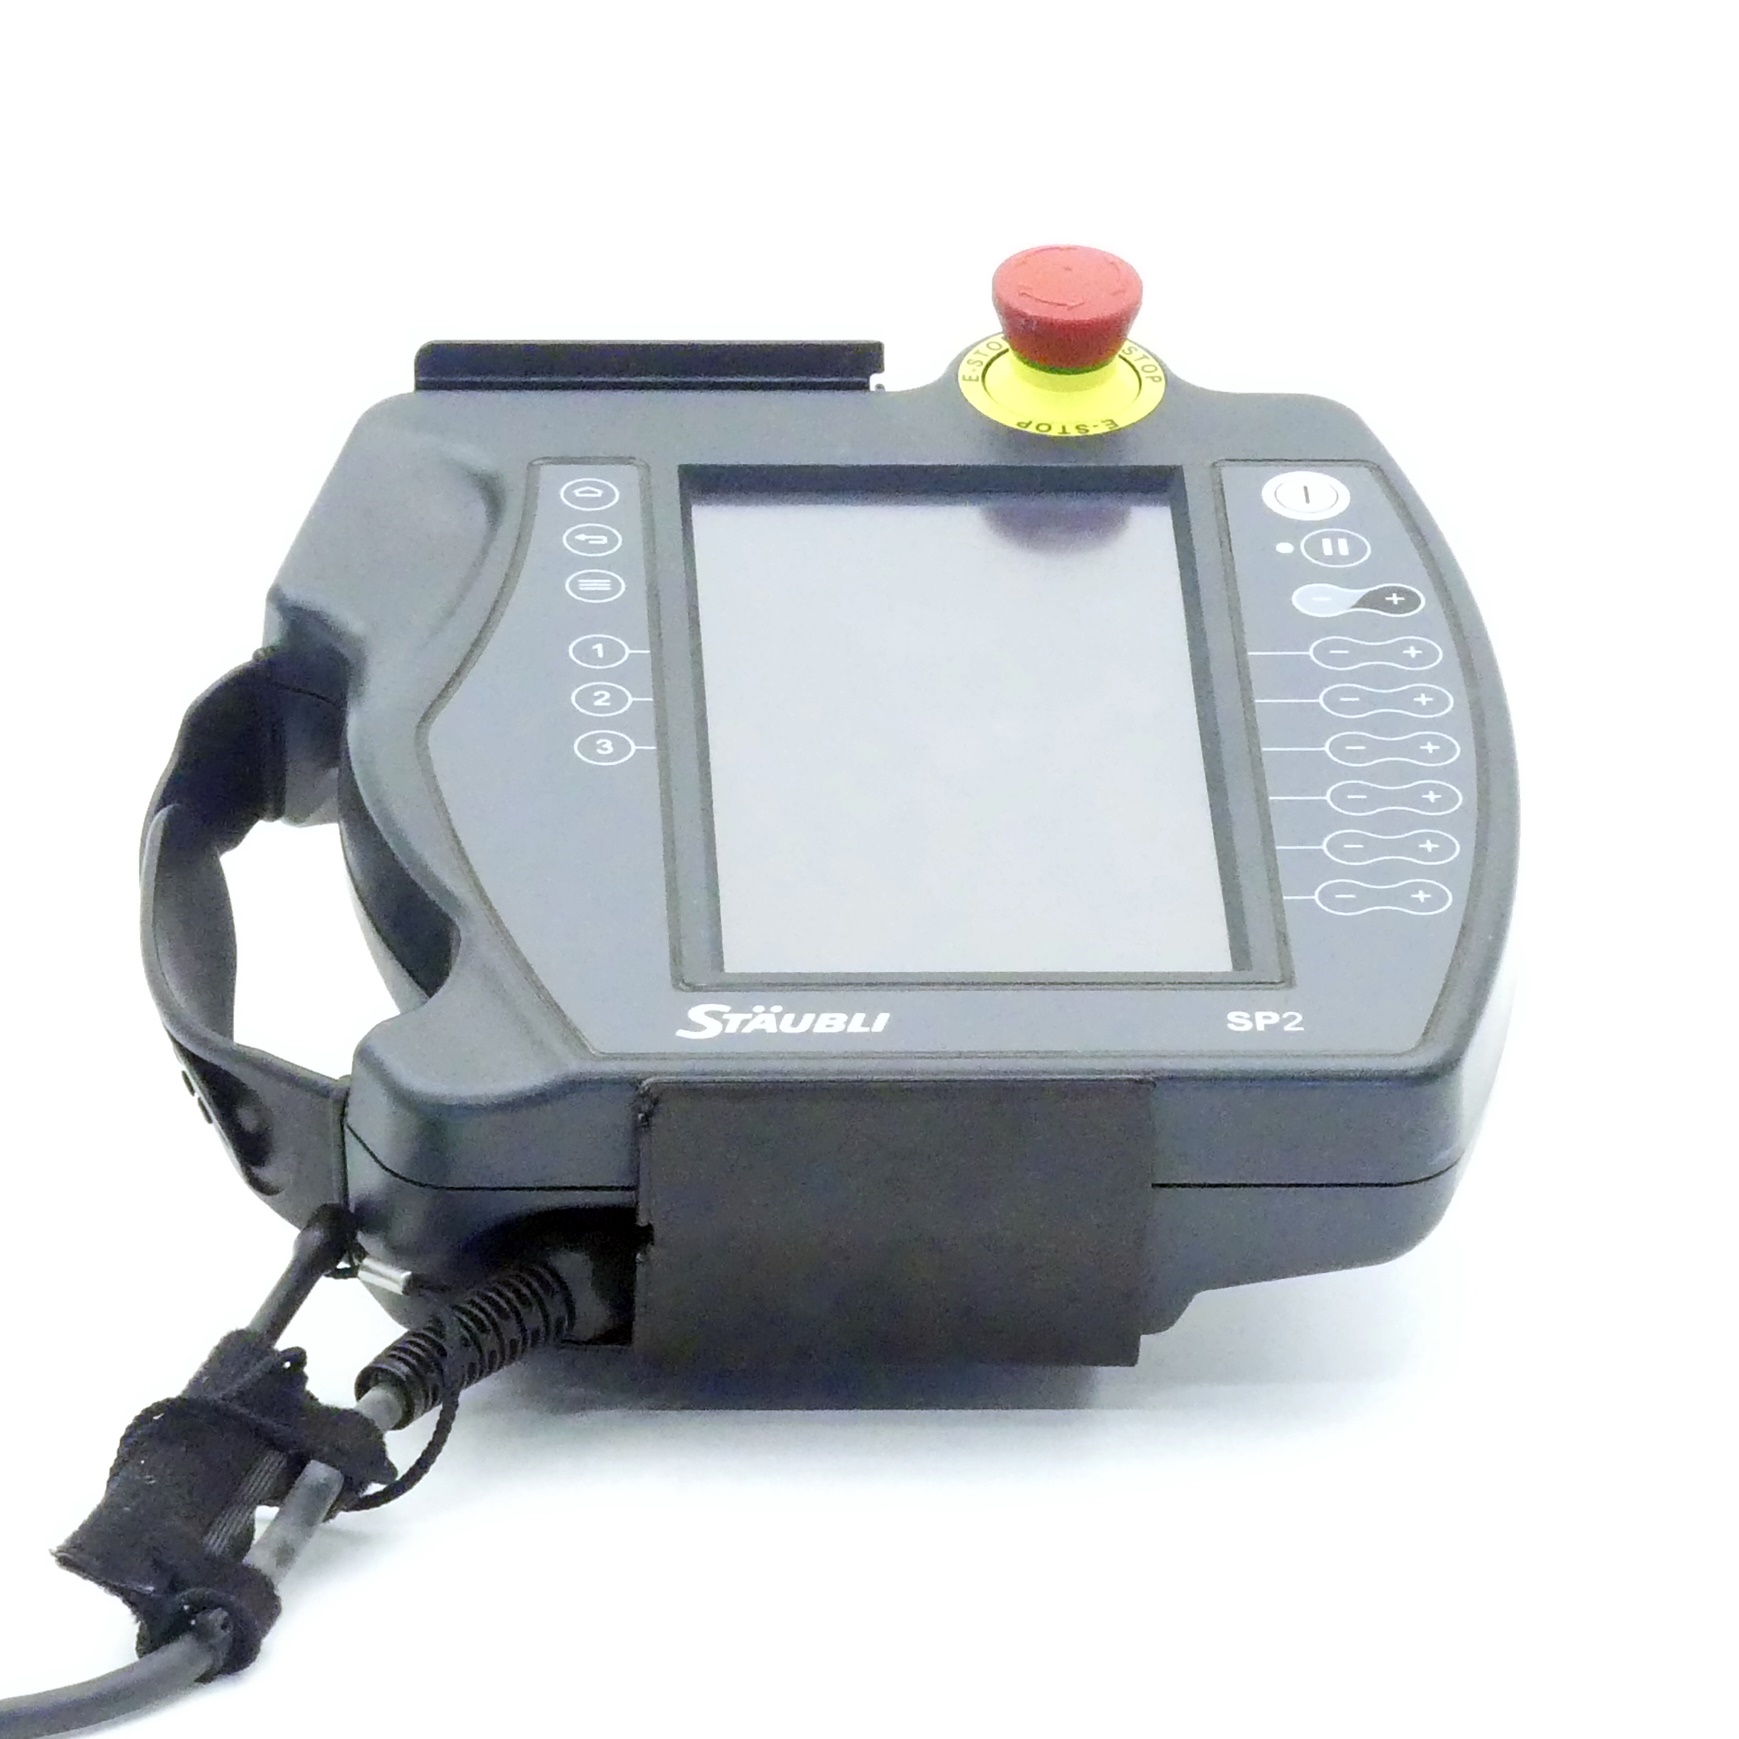 Hand-held control device SP2 